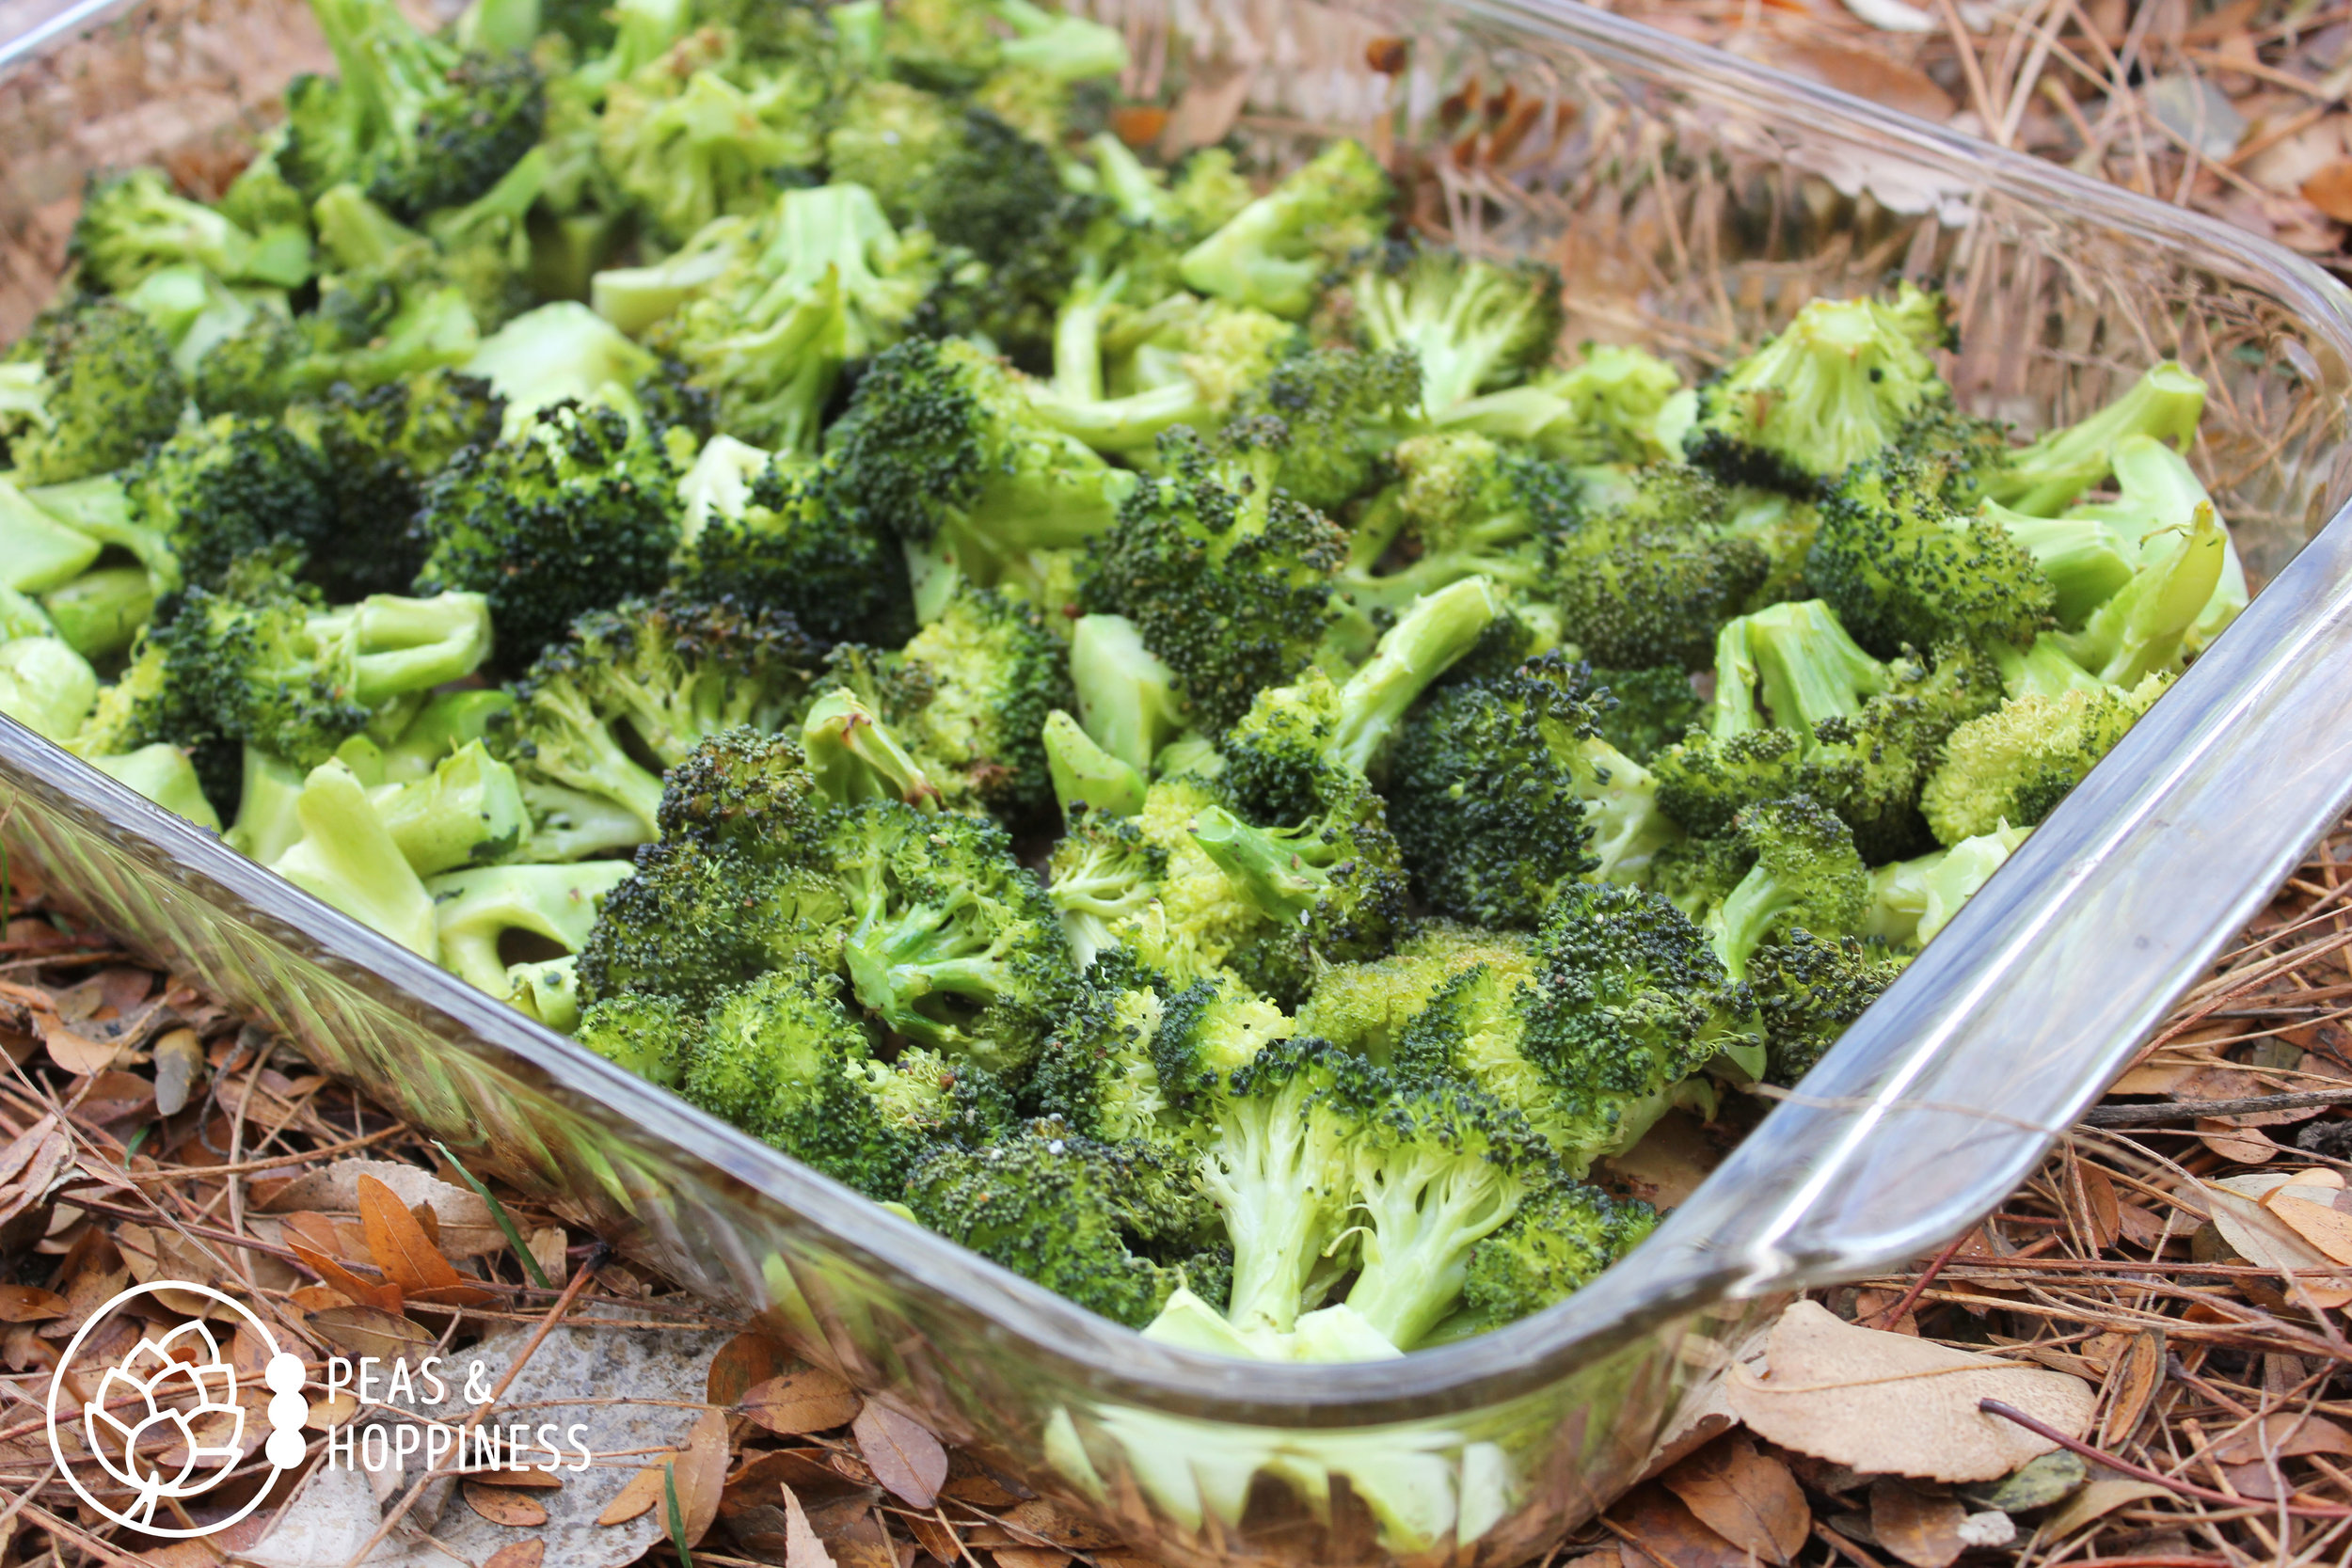 If you look carefully you can see some of the Maillard browning which took place at the tips of these broccoli florets in this Crowd-Pleasing Roasted Broccoli